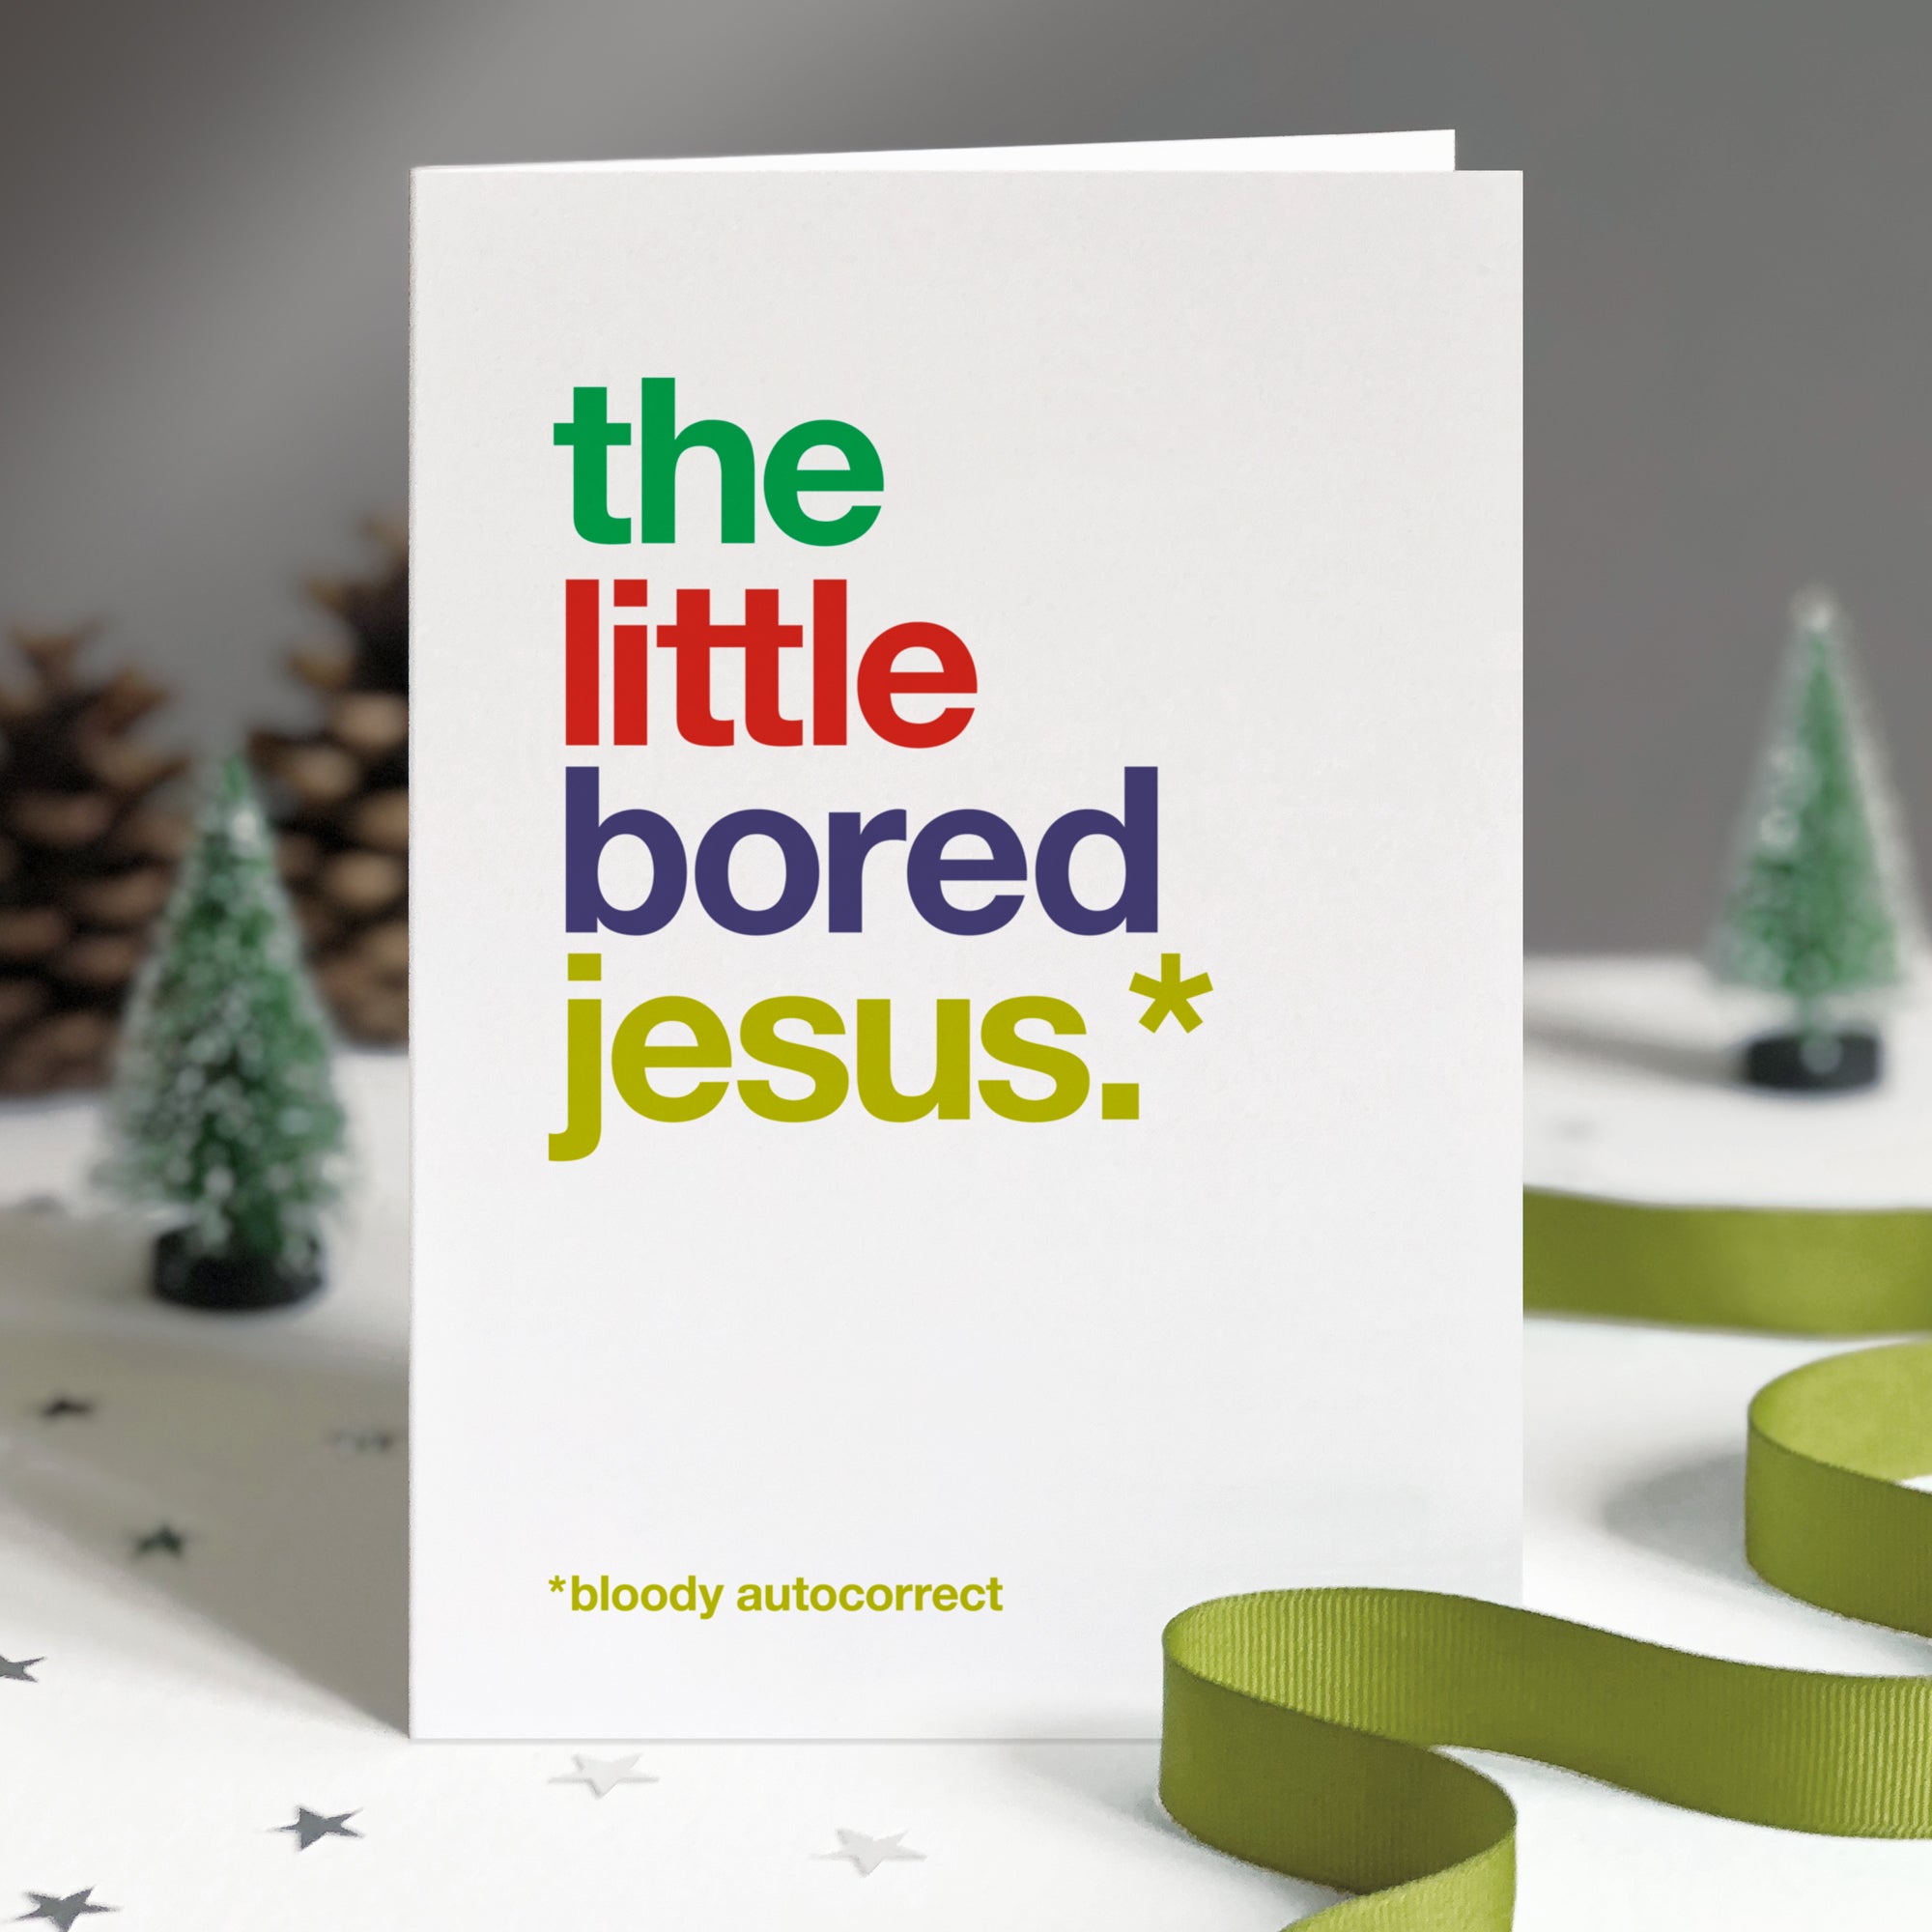 Funny christmas card autocorrected to 'the little bored jesus'.